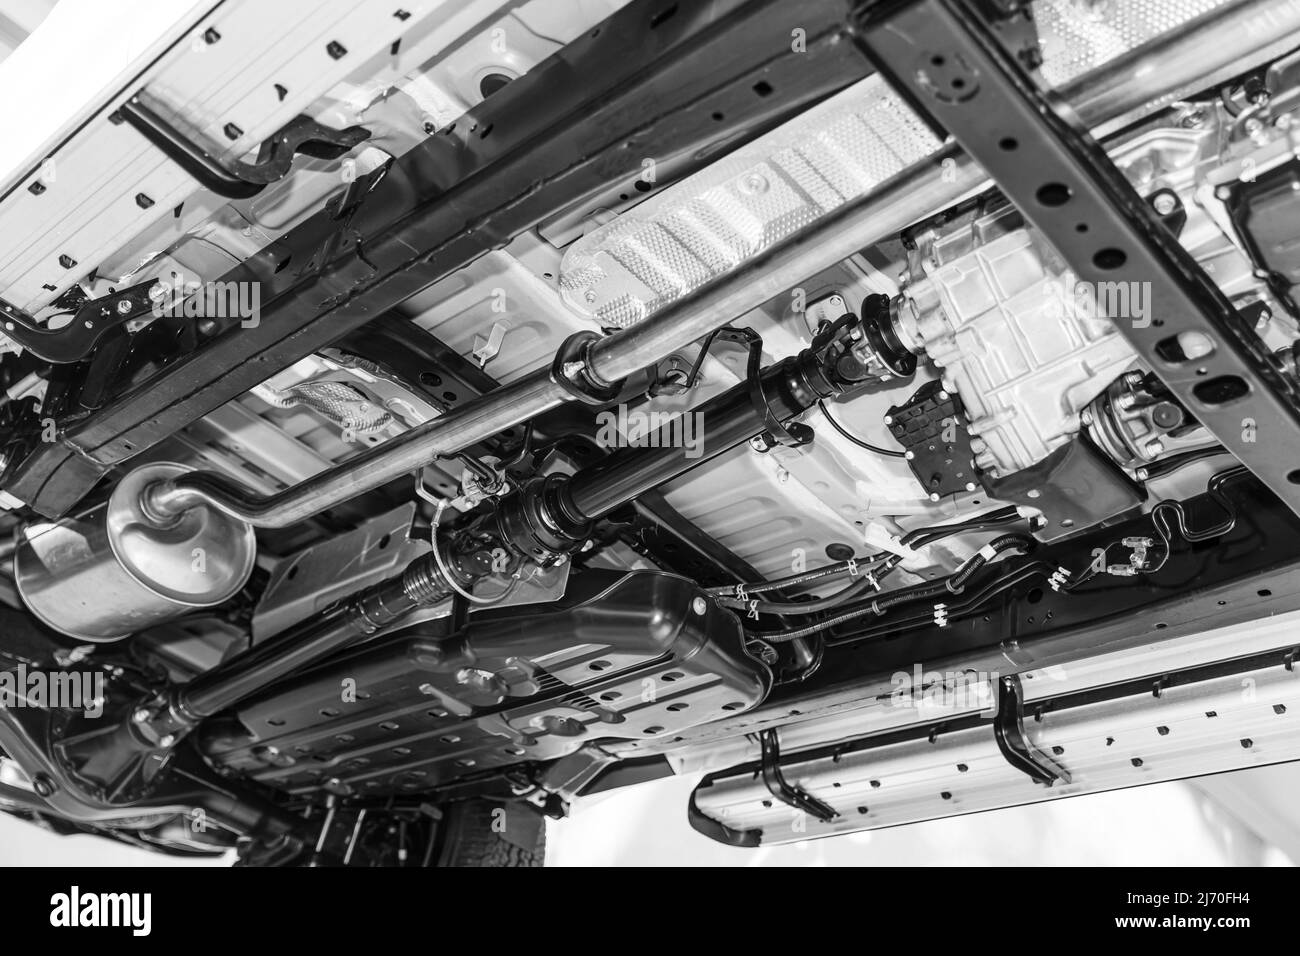 under the car chassis,truck drive shaft and exhaust chamber silencer muffler system Stock Photo